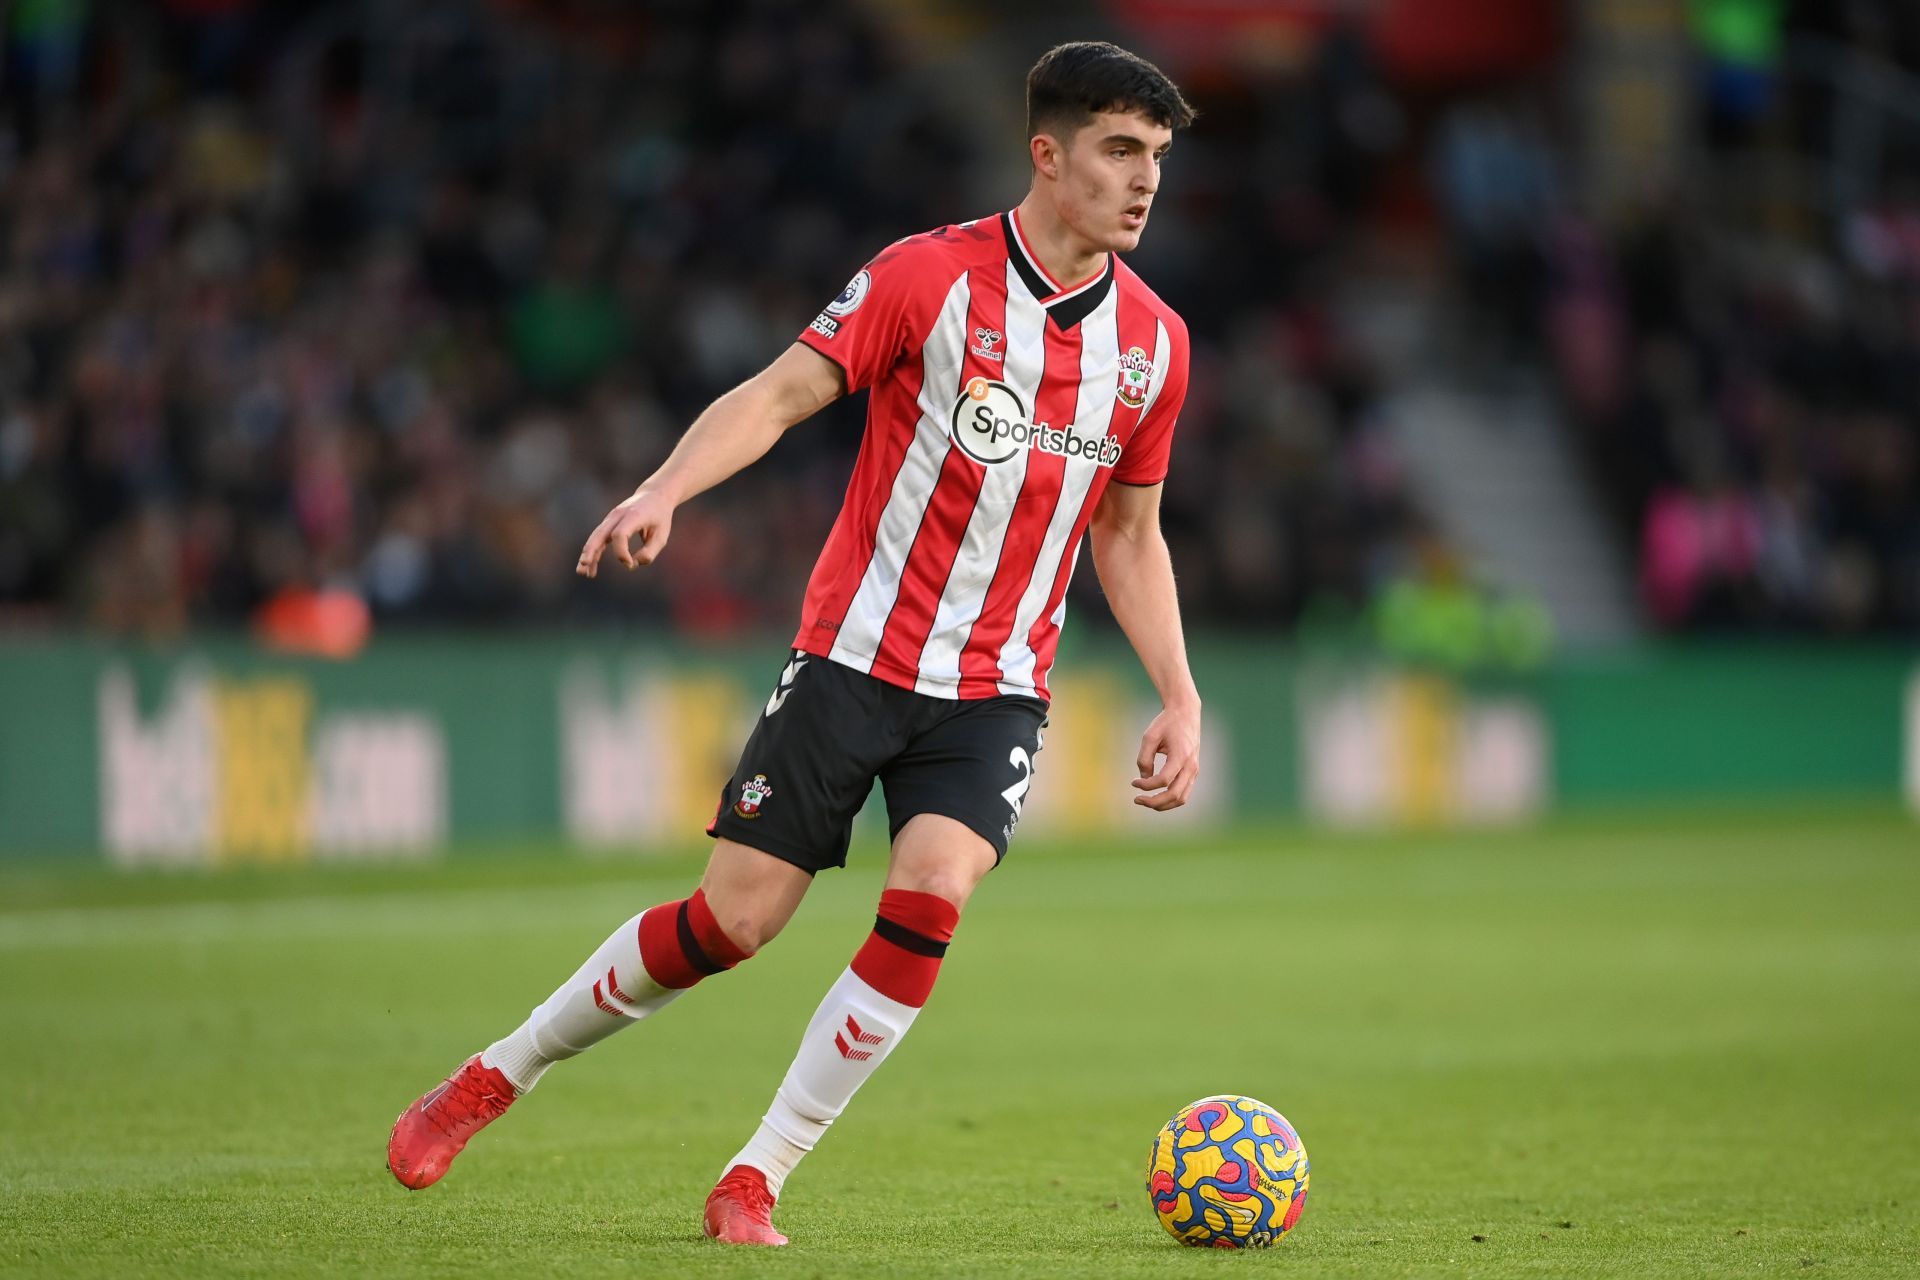 Tino Livramento has evolved in leaps and bounds since joining Southampton.